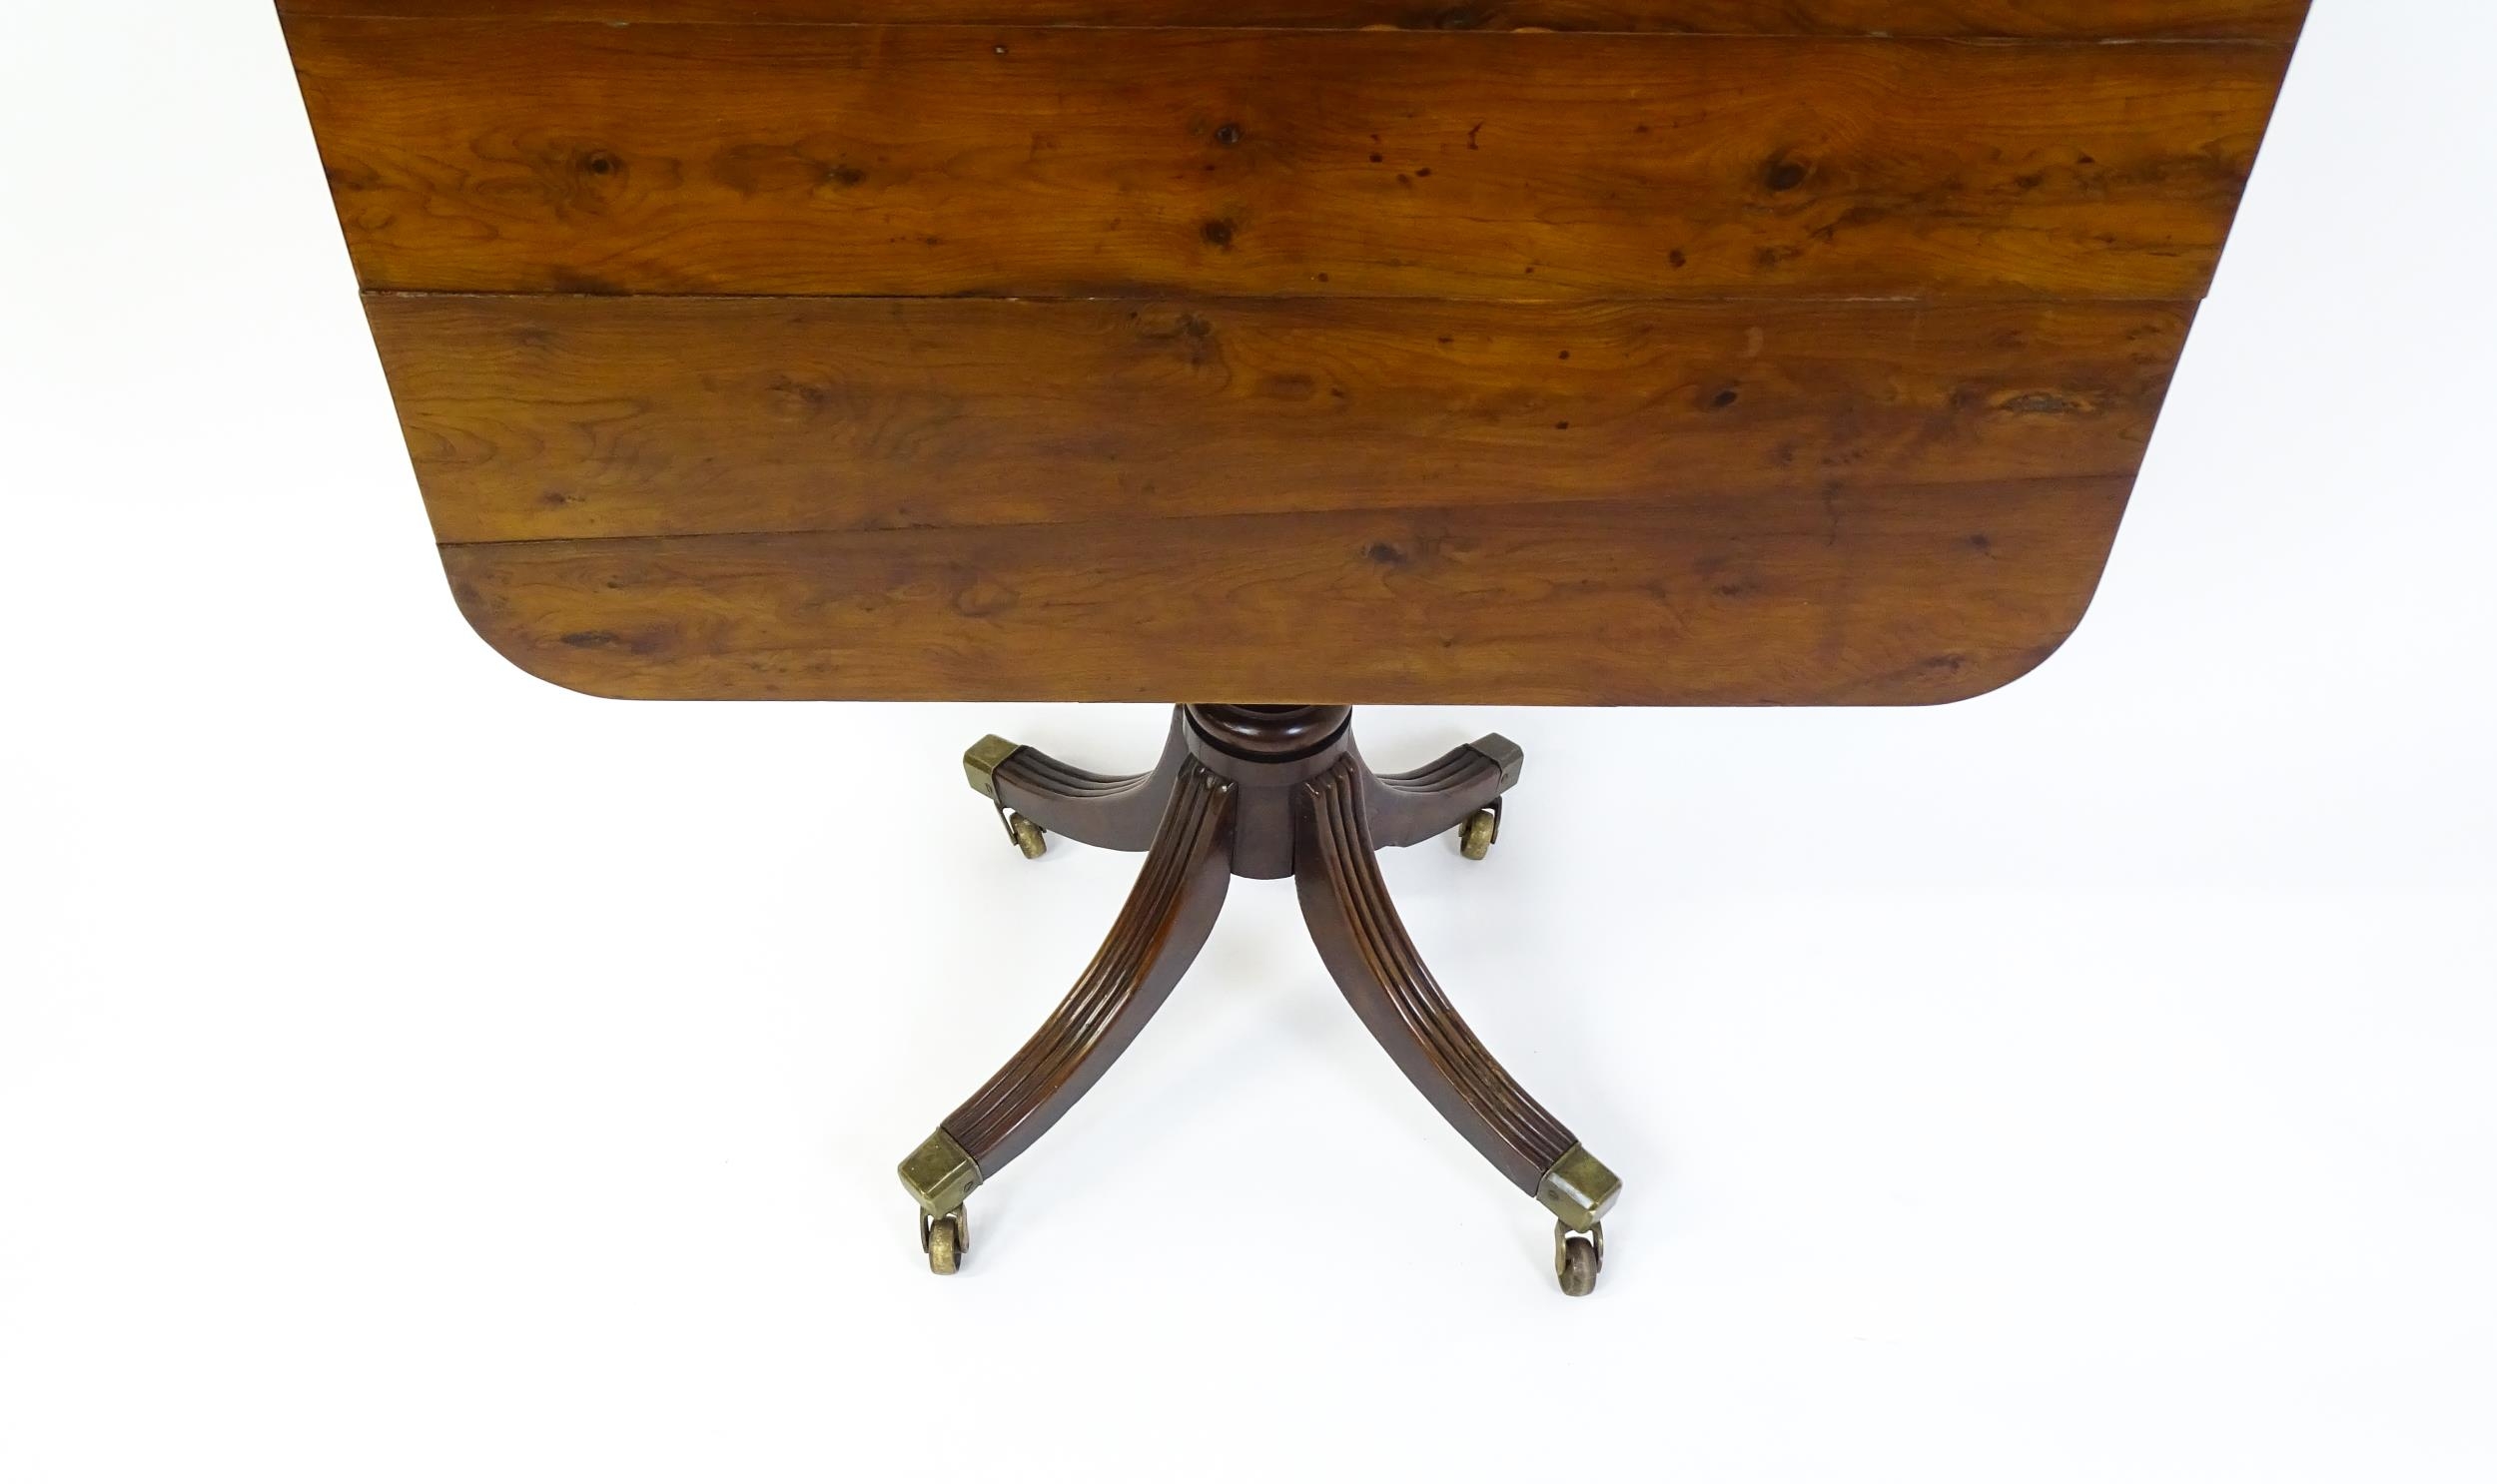 A 19thC tilt top occasional table with yew wood planked top above a reeded mahogany pedestal and - Image 7 of 13